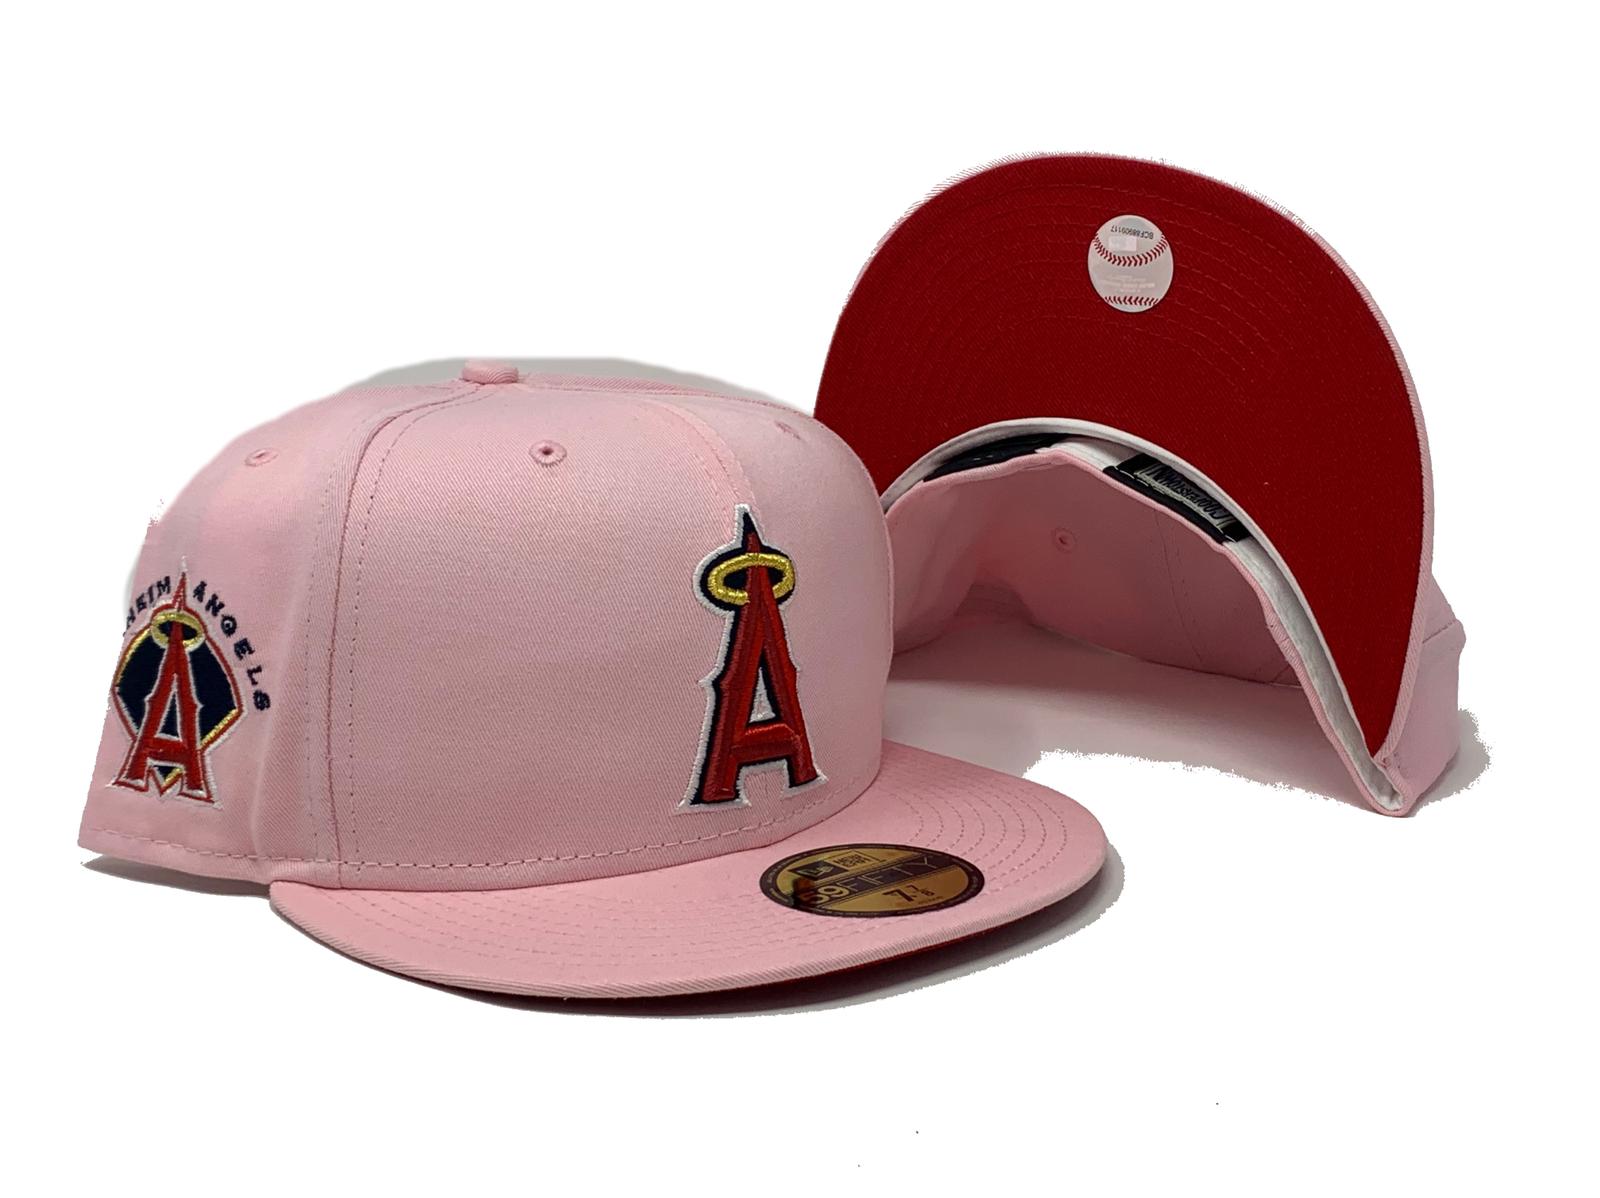 New Era White/Pink Los Angeles Angels Chrome Rogue 59FIFTY Fitted Hat